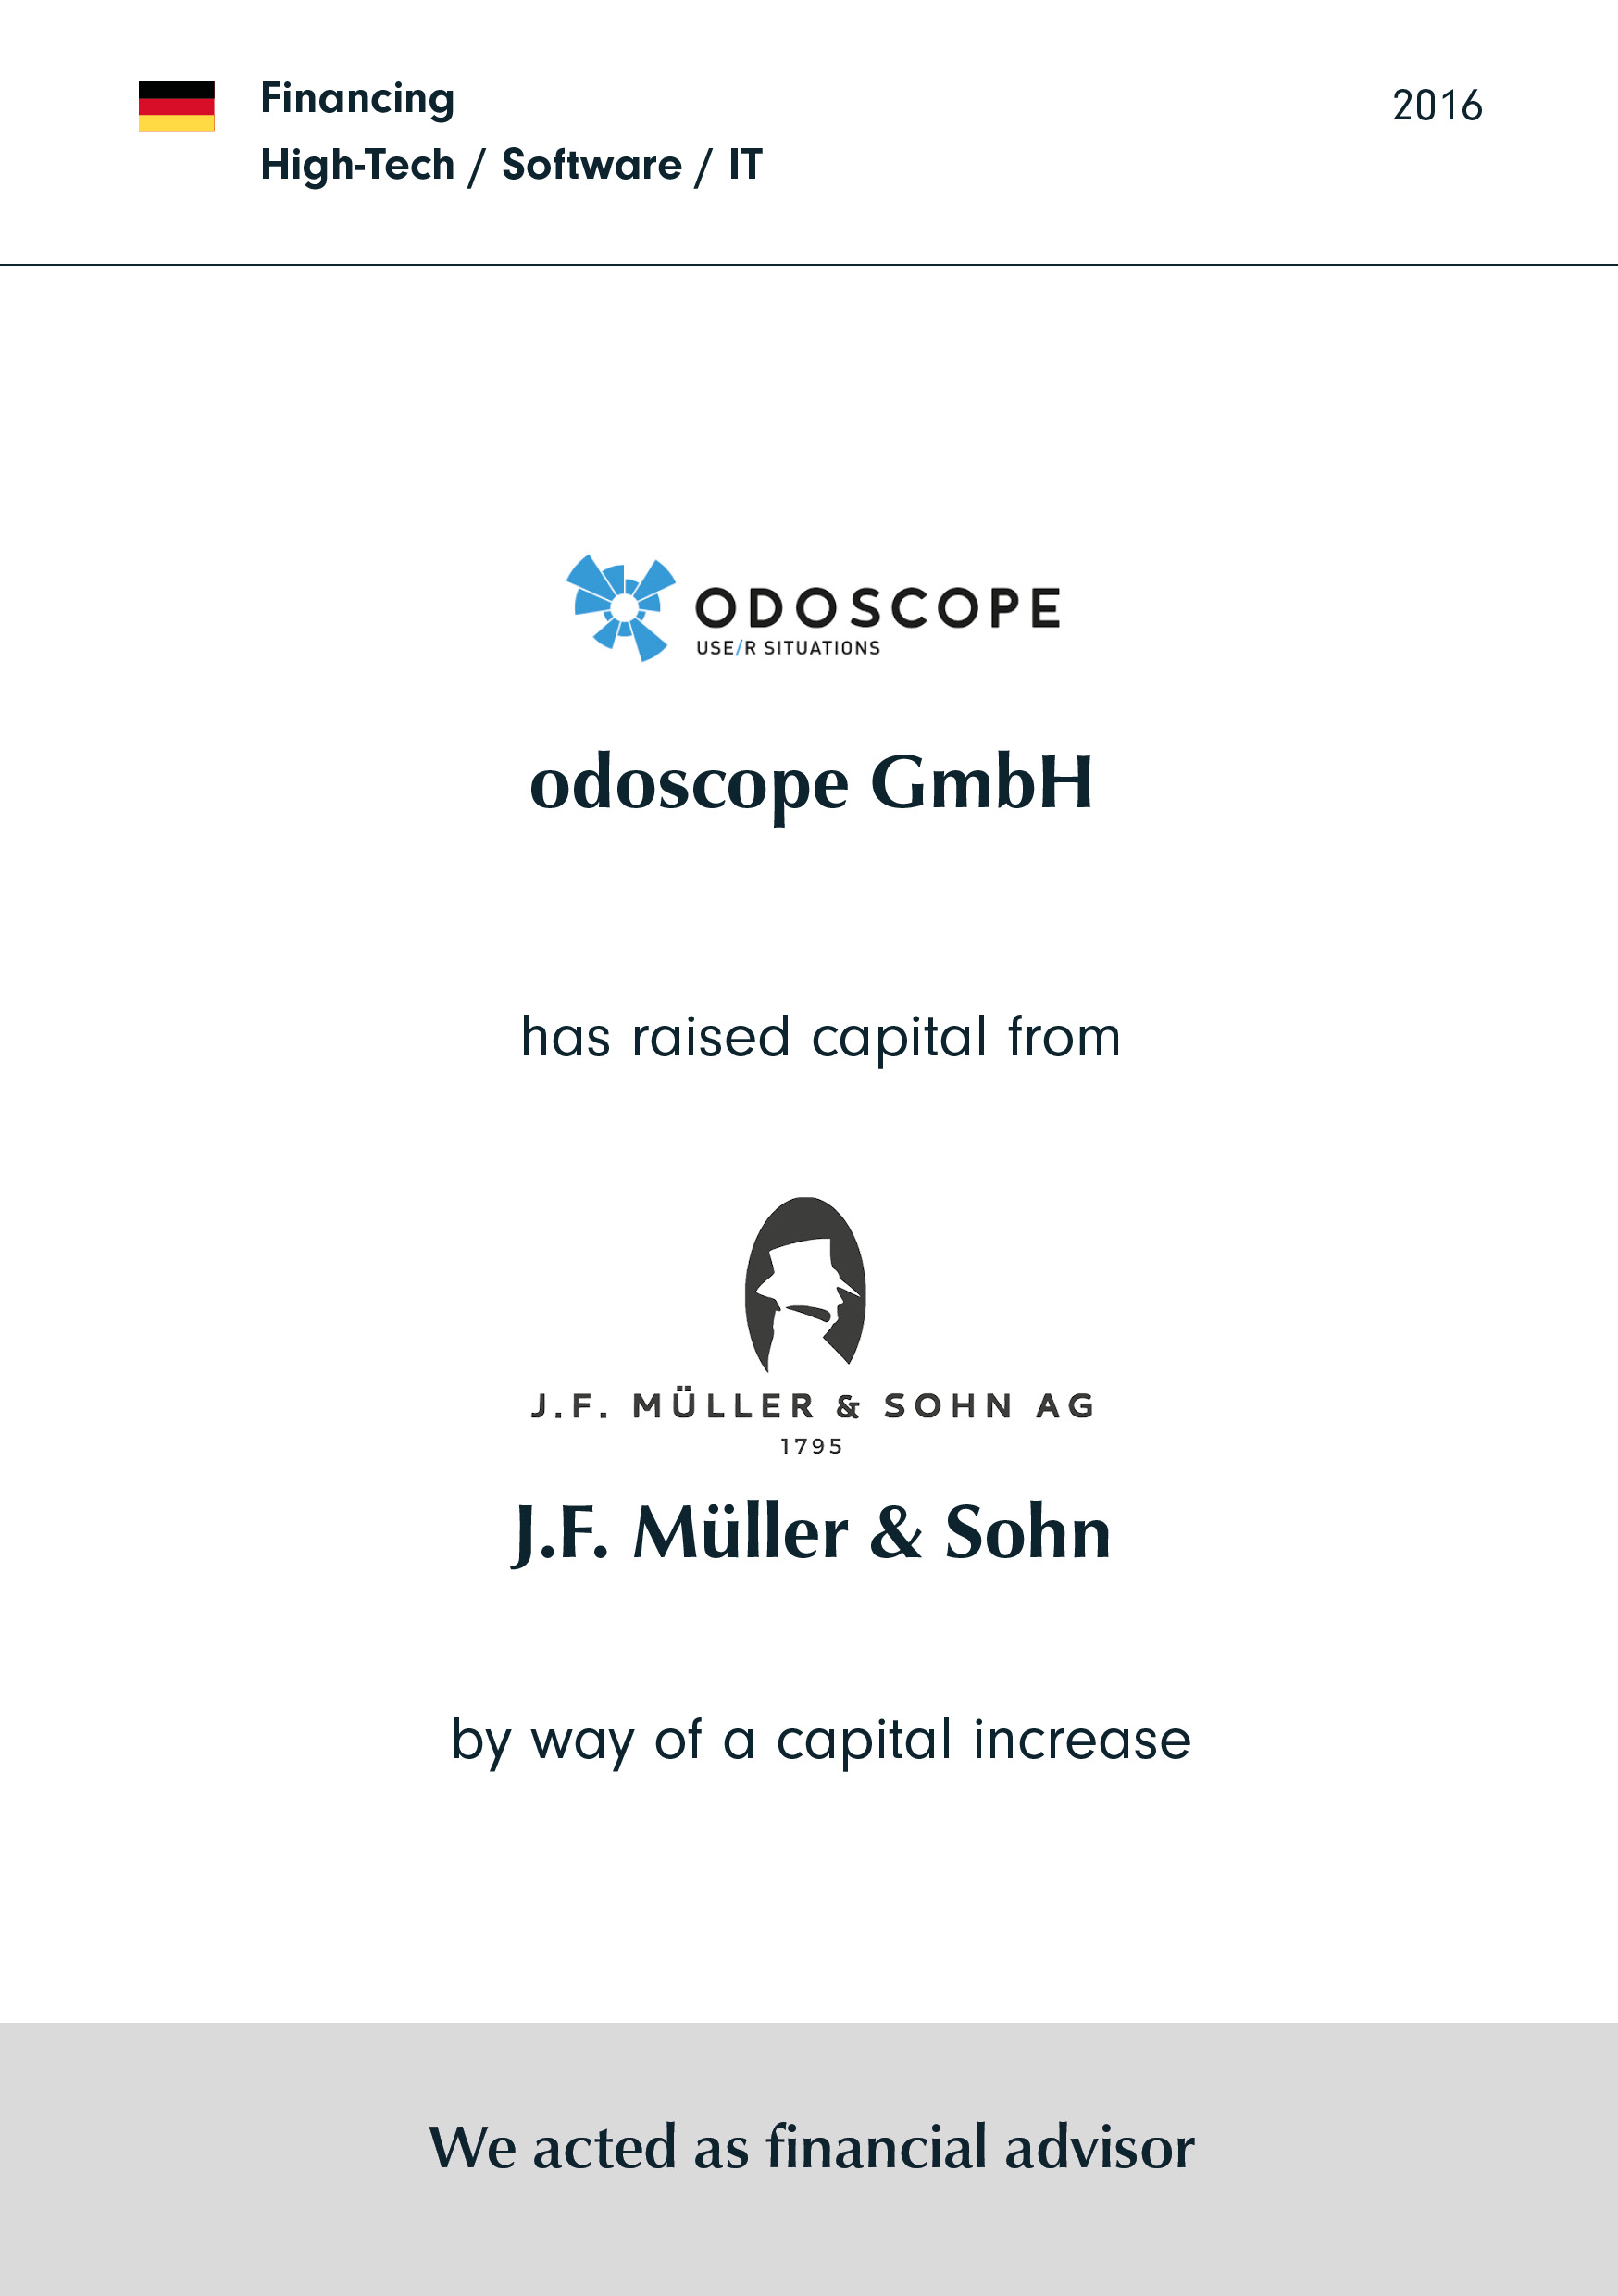 odoscope has raised capital from J.F. Müller & Sohn by way of a capital increase